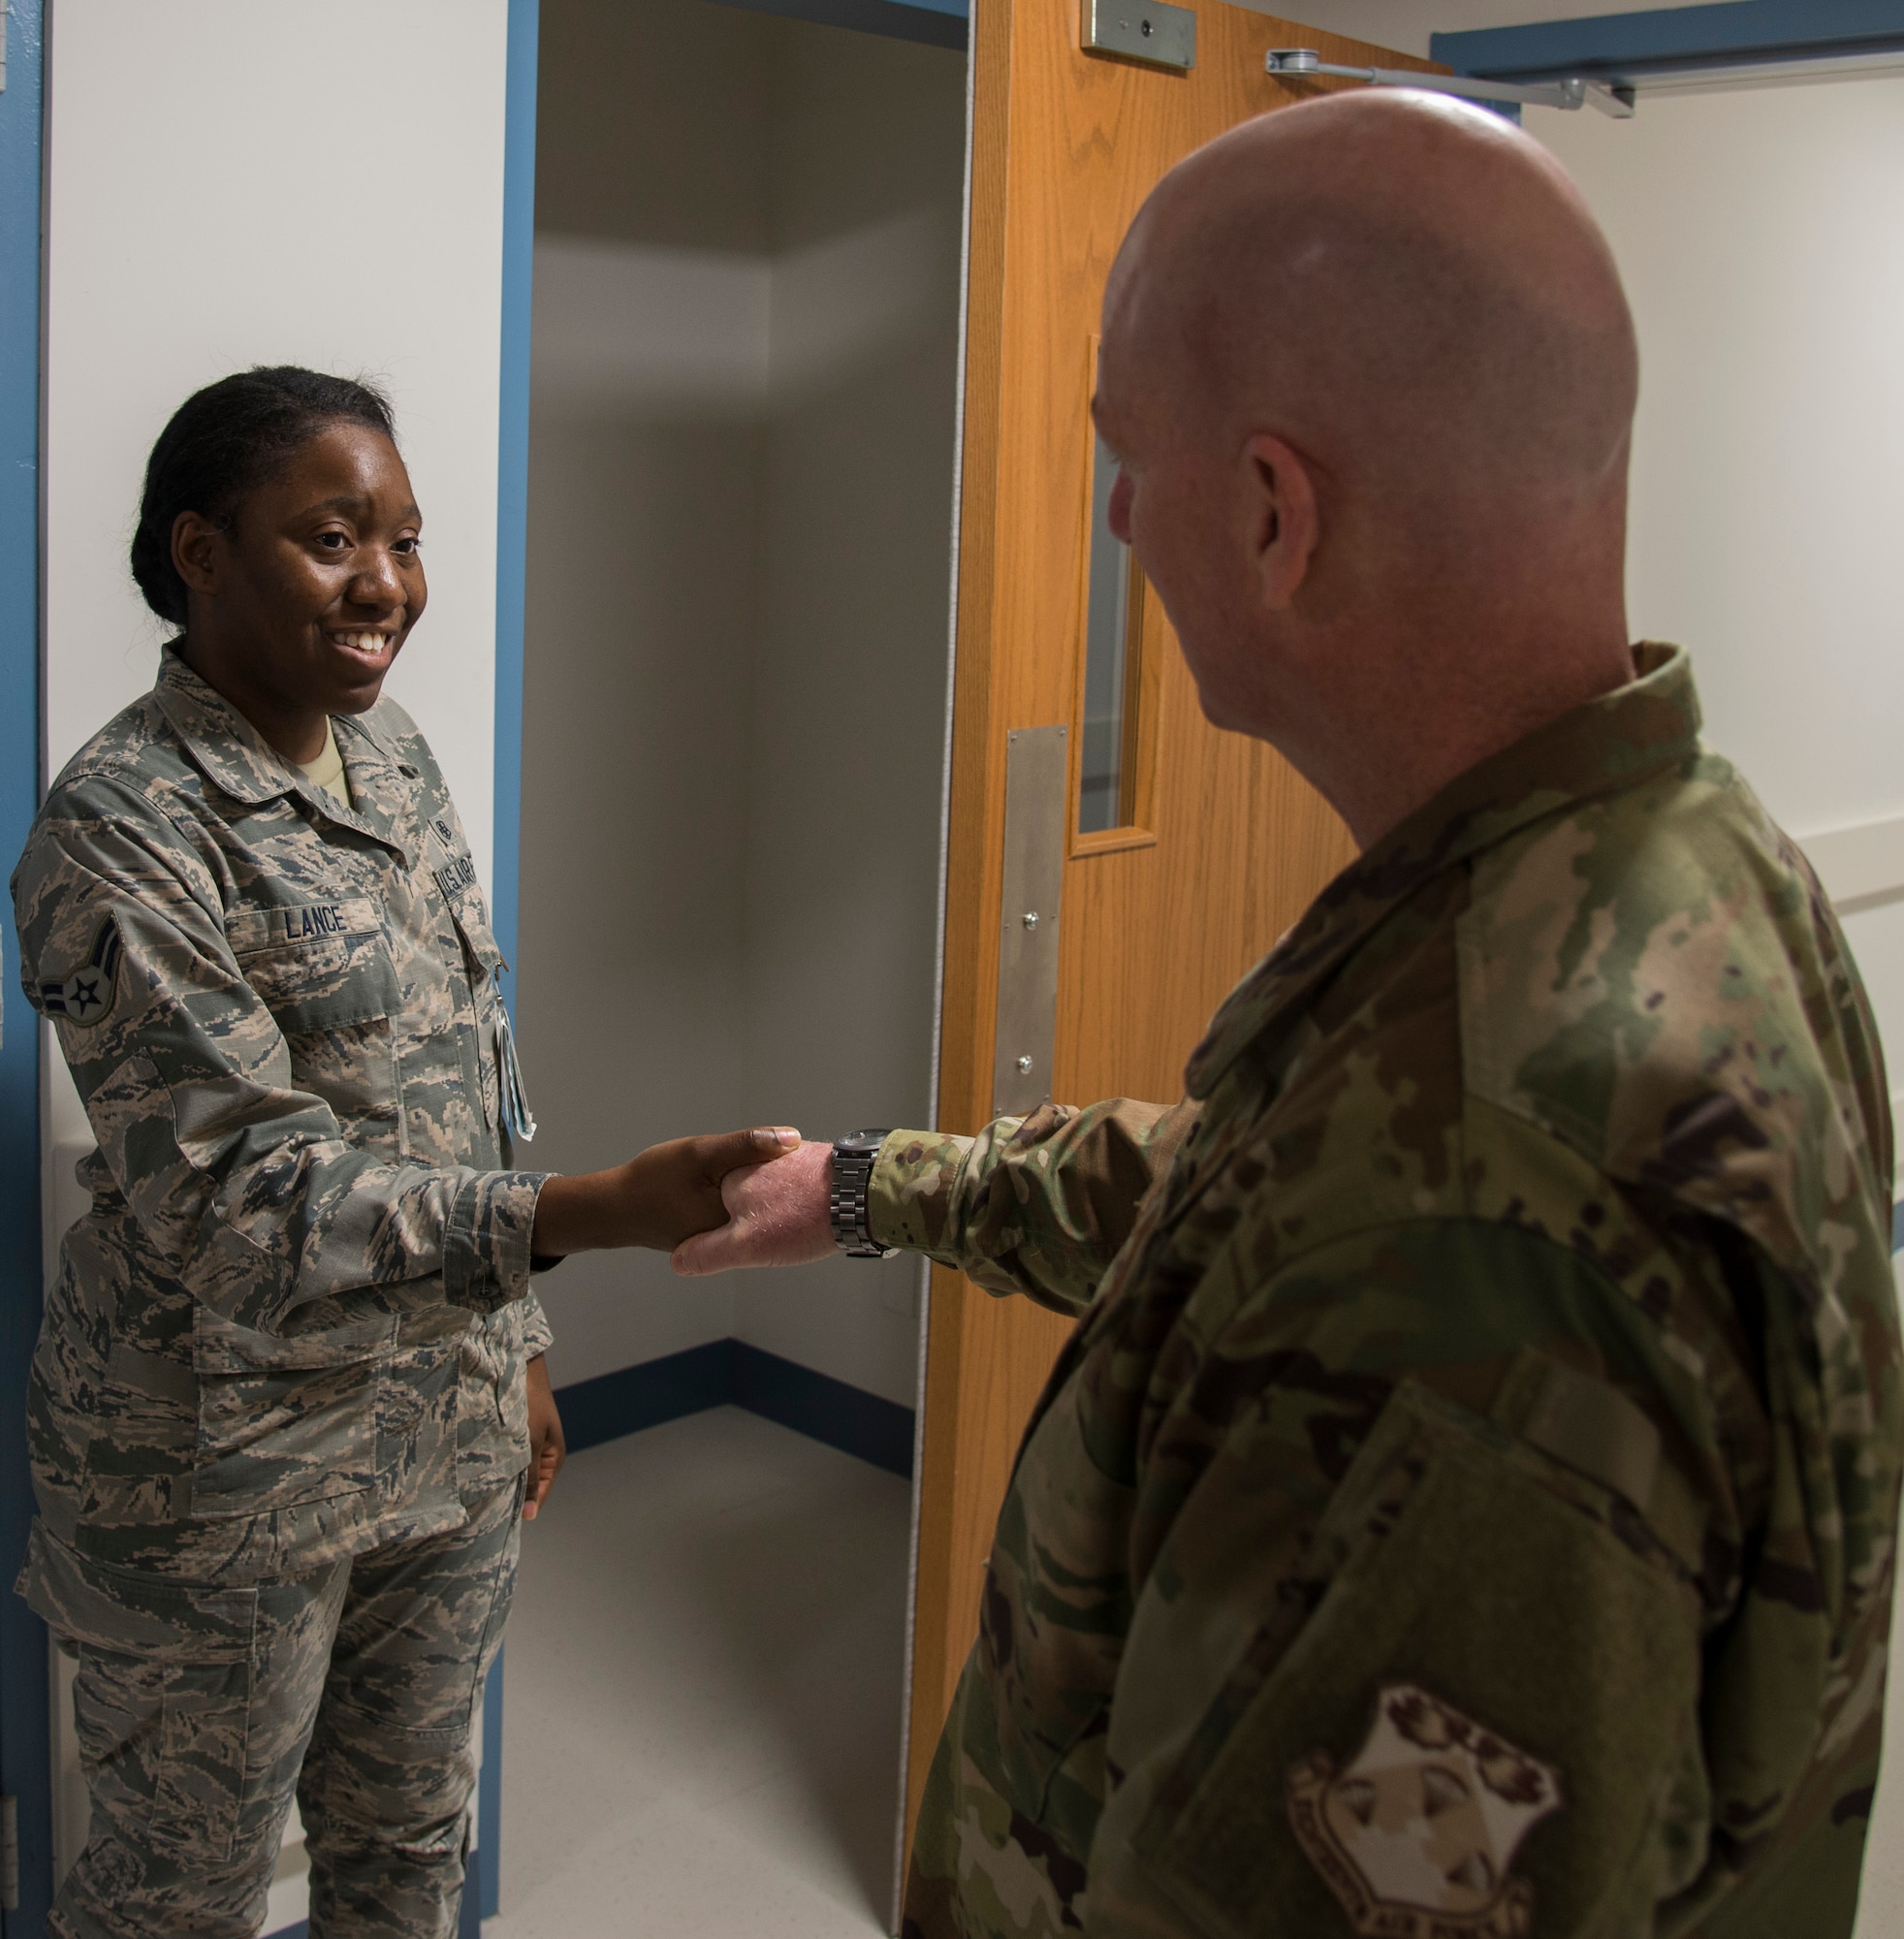 Maj. Gen. Sam Barrett, 18th Air Force commander, coins Dominique Lance, 375th Medical Support Squadron medical material technician, during his visit to the 375th Medical Group on Oct. 11, 2018, at Scott Air Force Base, Illinois. (U.S. Air Force photo by Airman 1st Class Nathaniel Hudson)